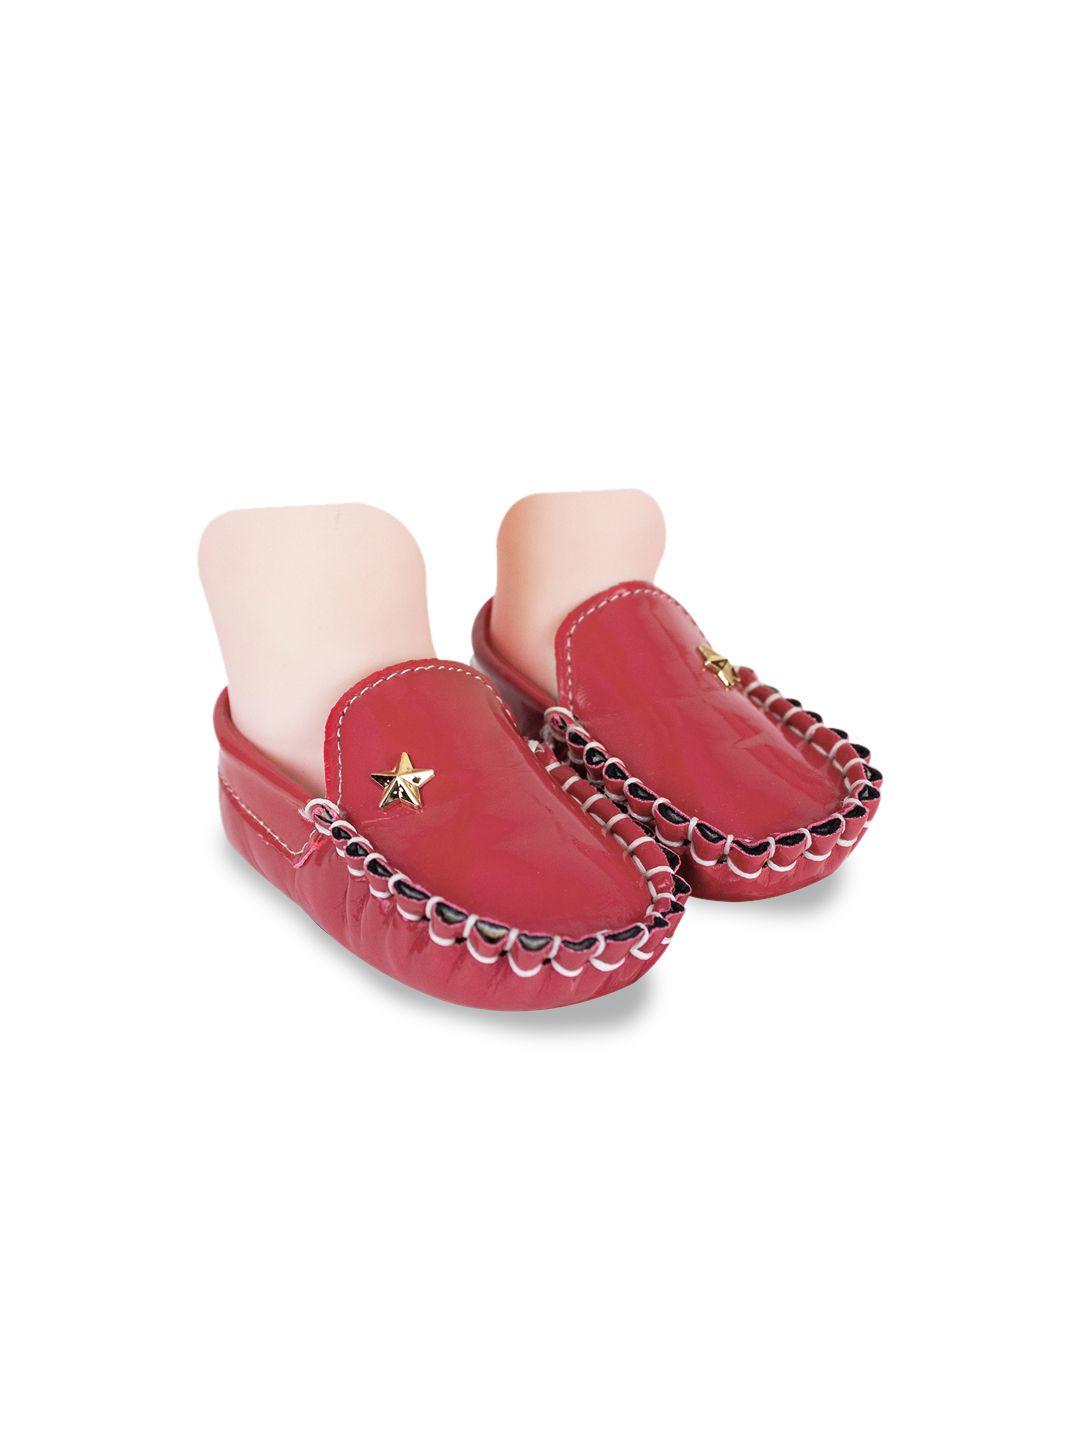 baesd infant boys loafer booties